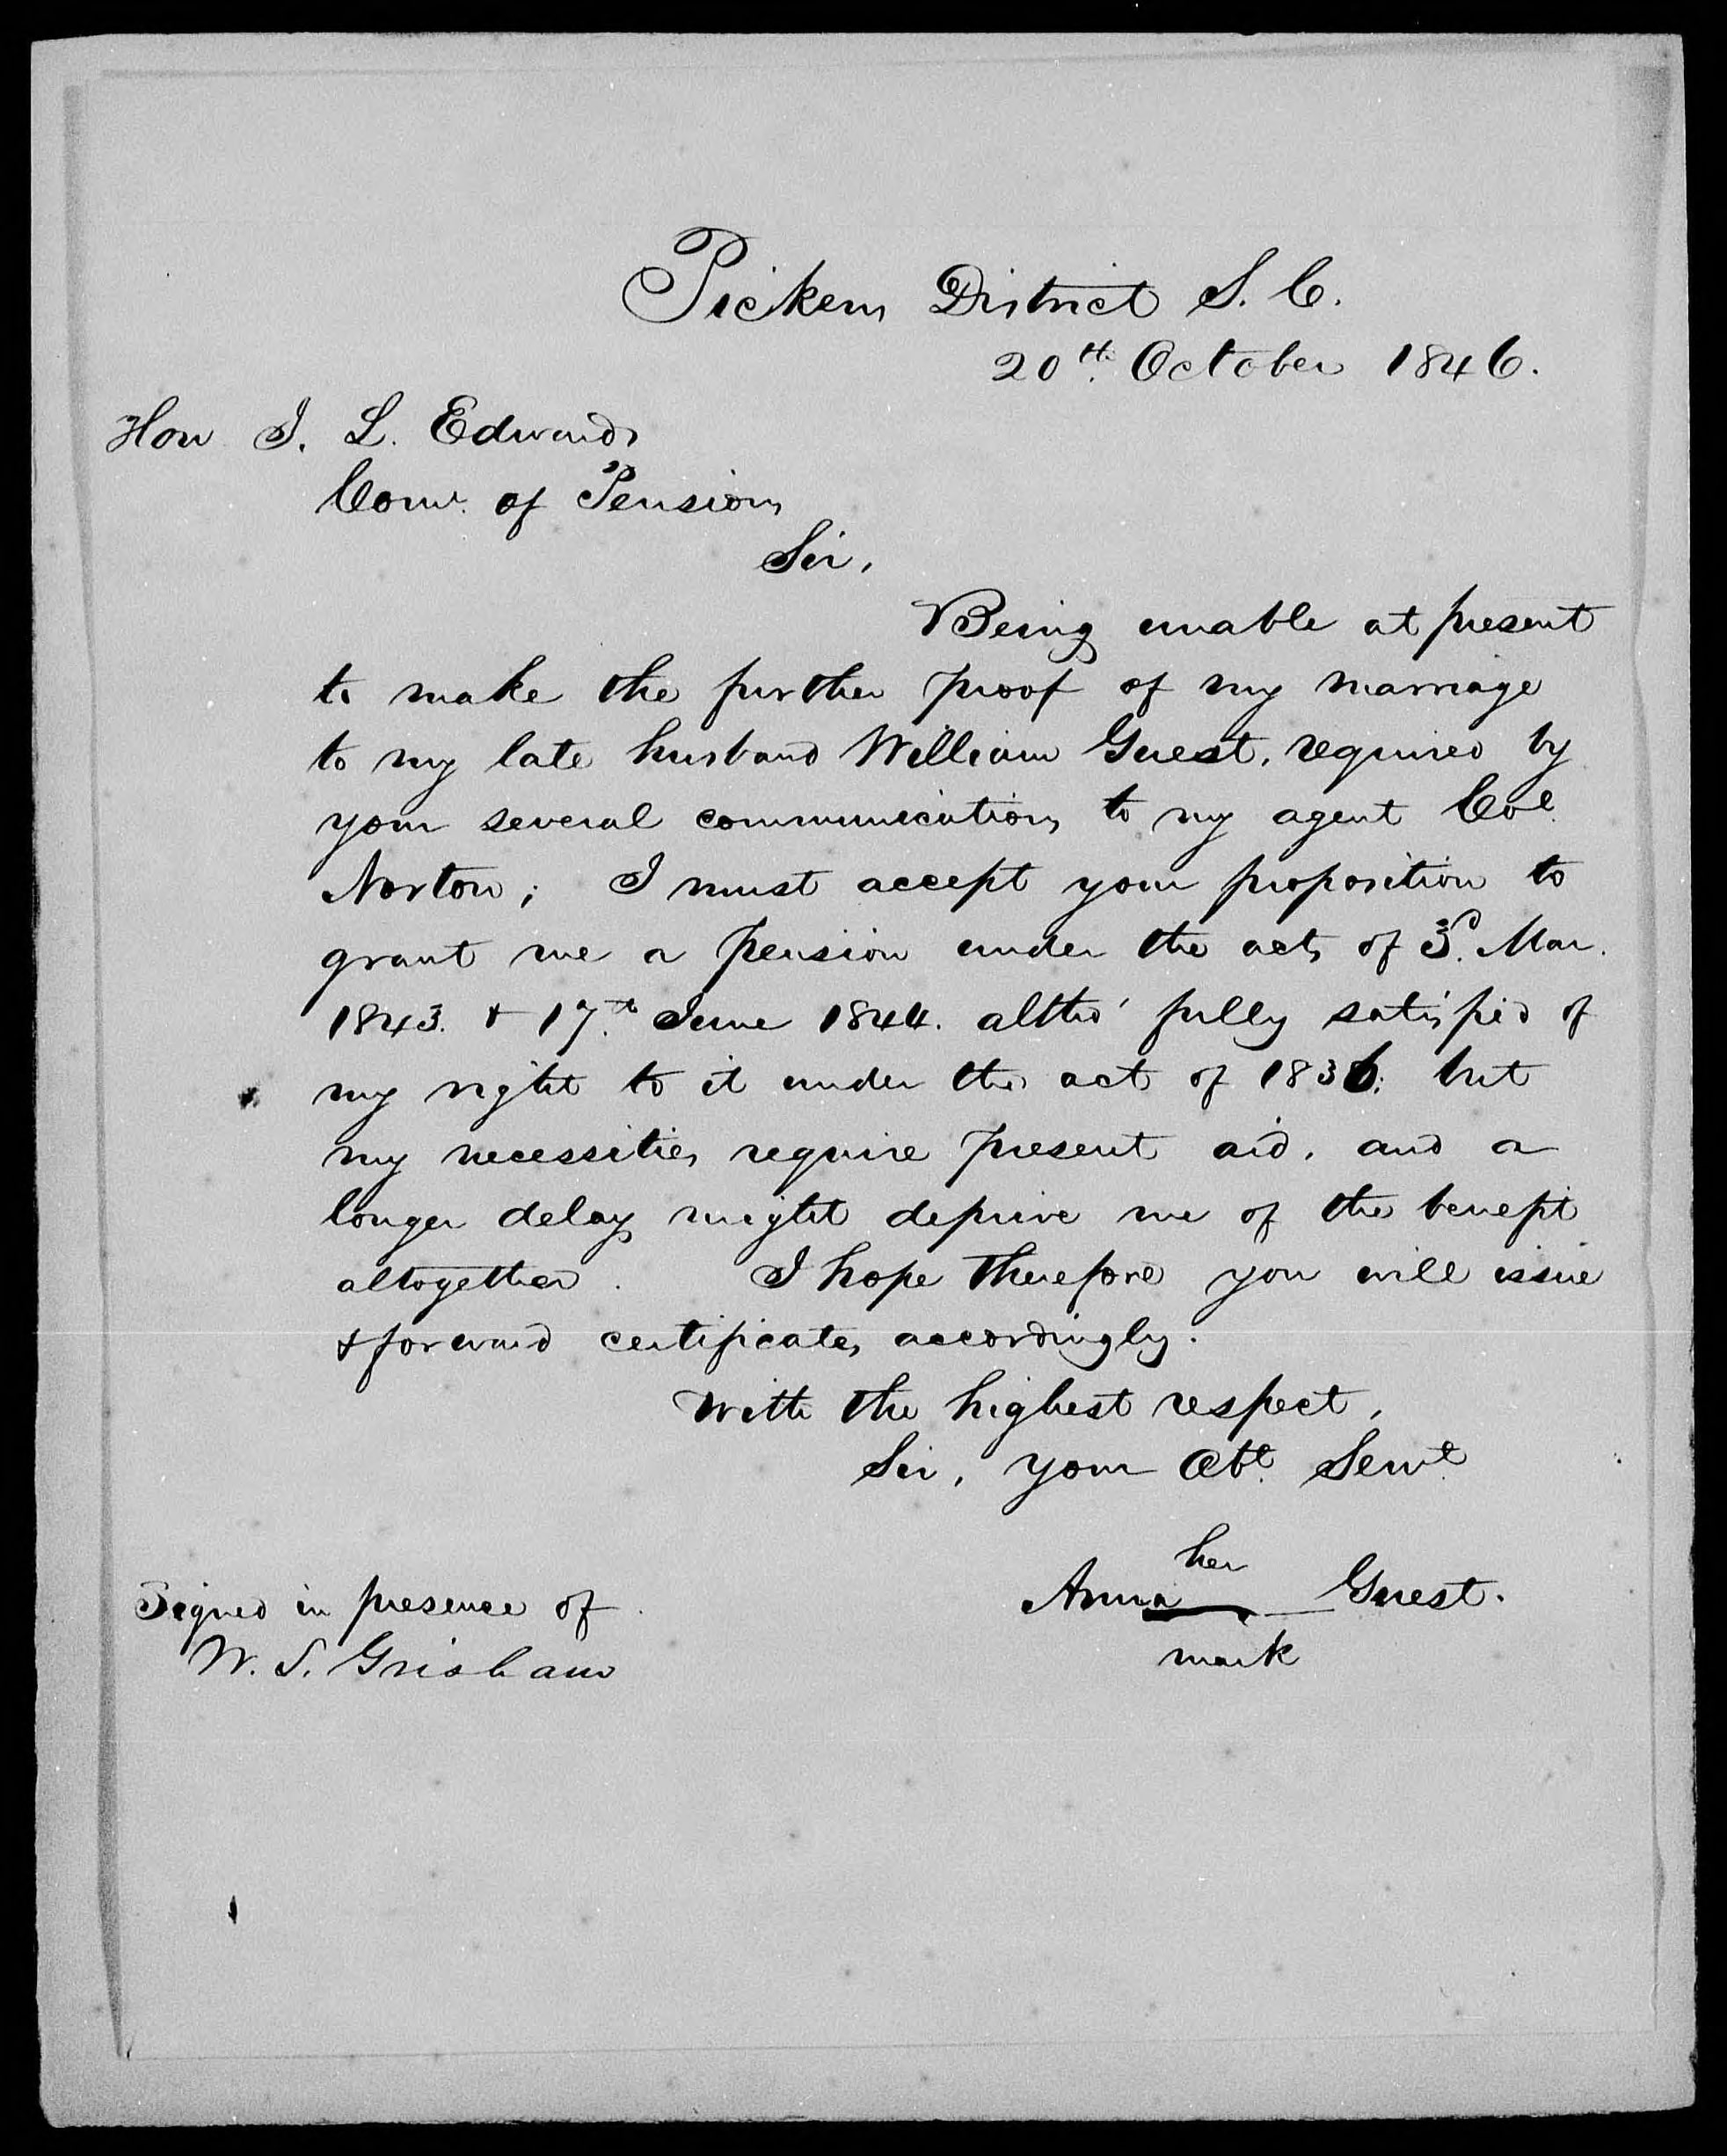 Letter from Anna Guest to James L. Edwards, 20 October 1846